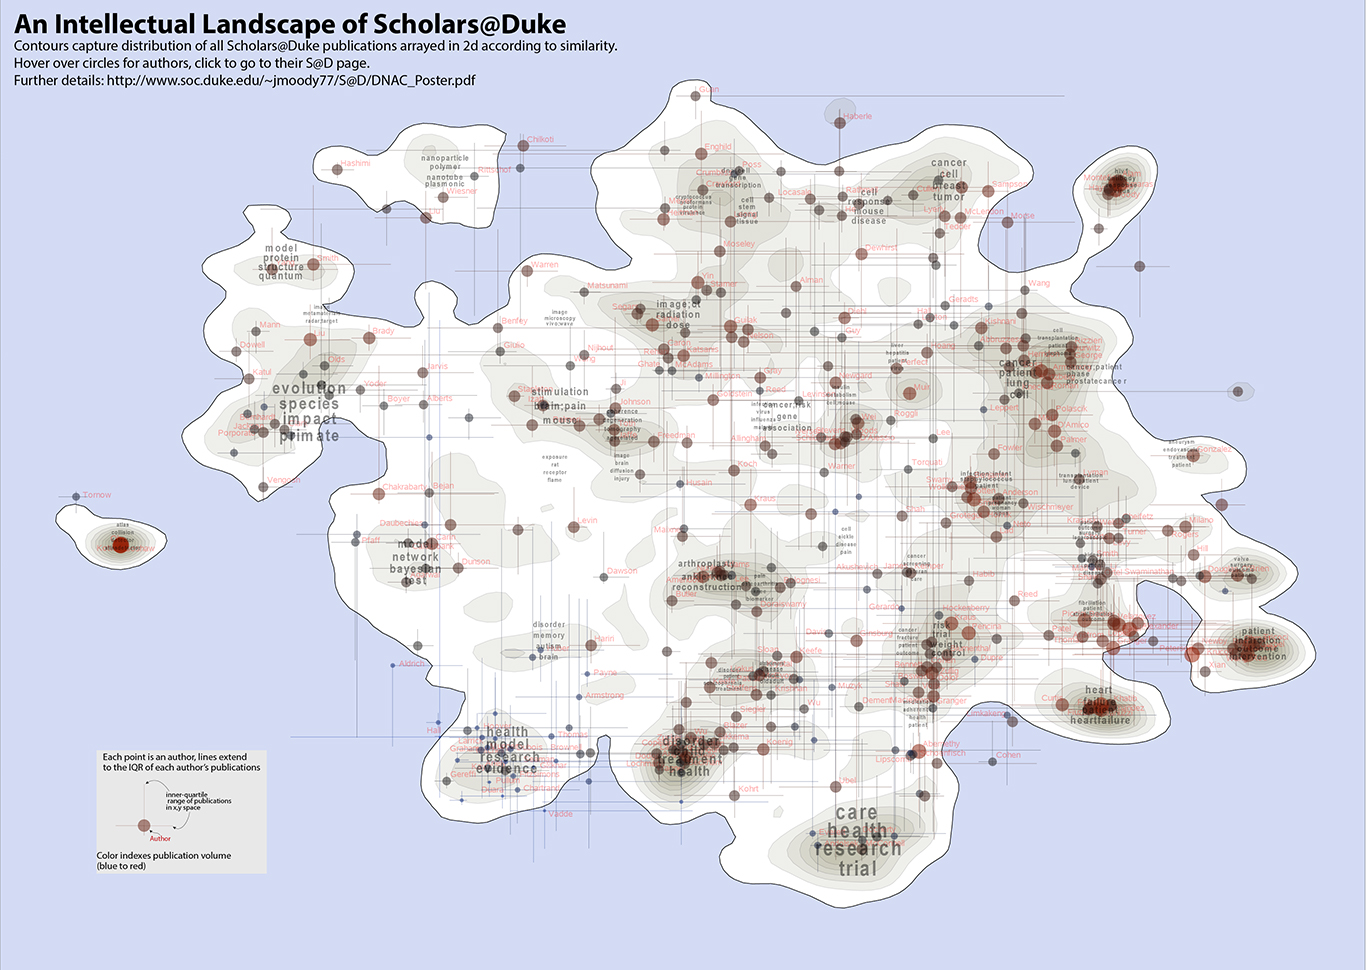 Professor James Moody and his team used language processing software to analyze the titles and abstracts of publications listed in the Scholars@Duke database and used the results to map Duke’s “intellectual space.”